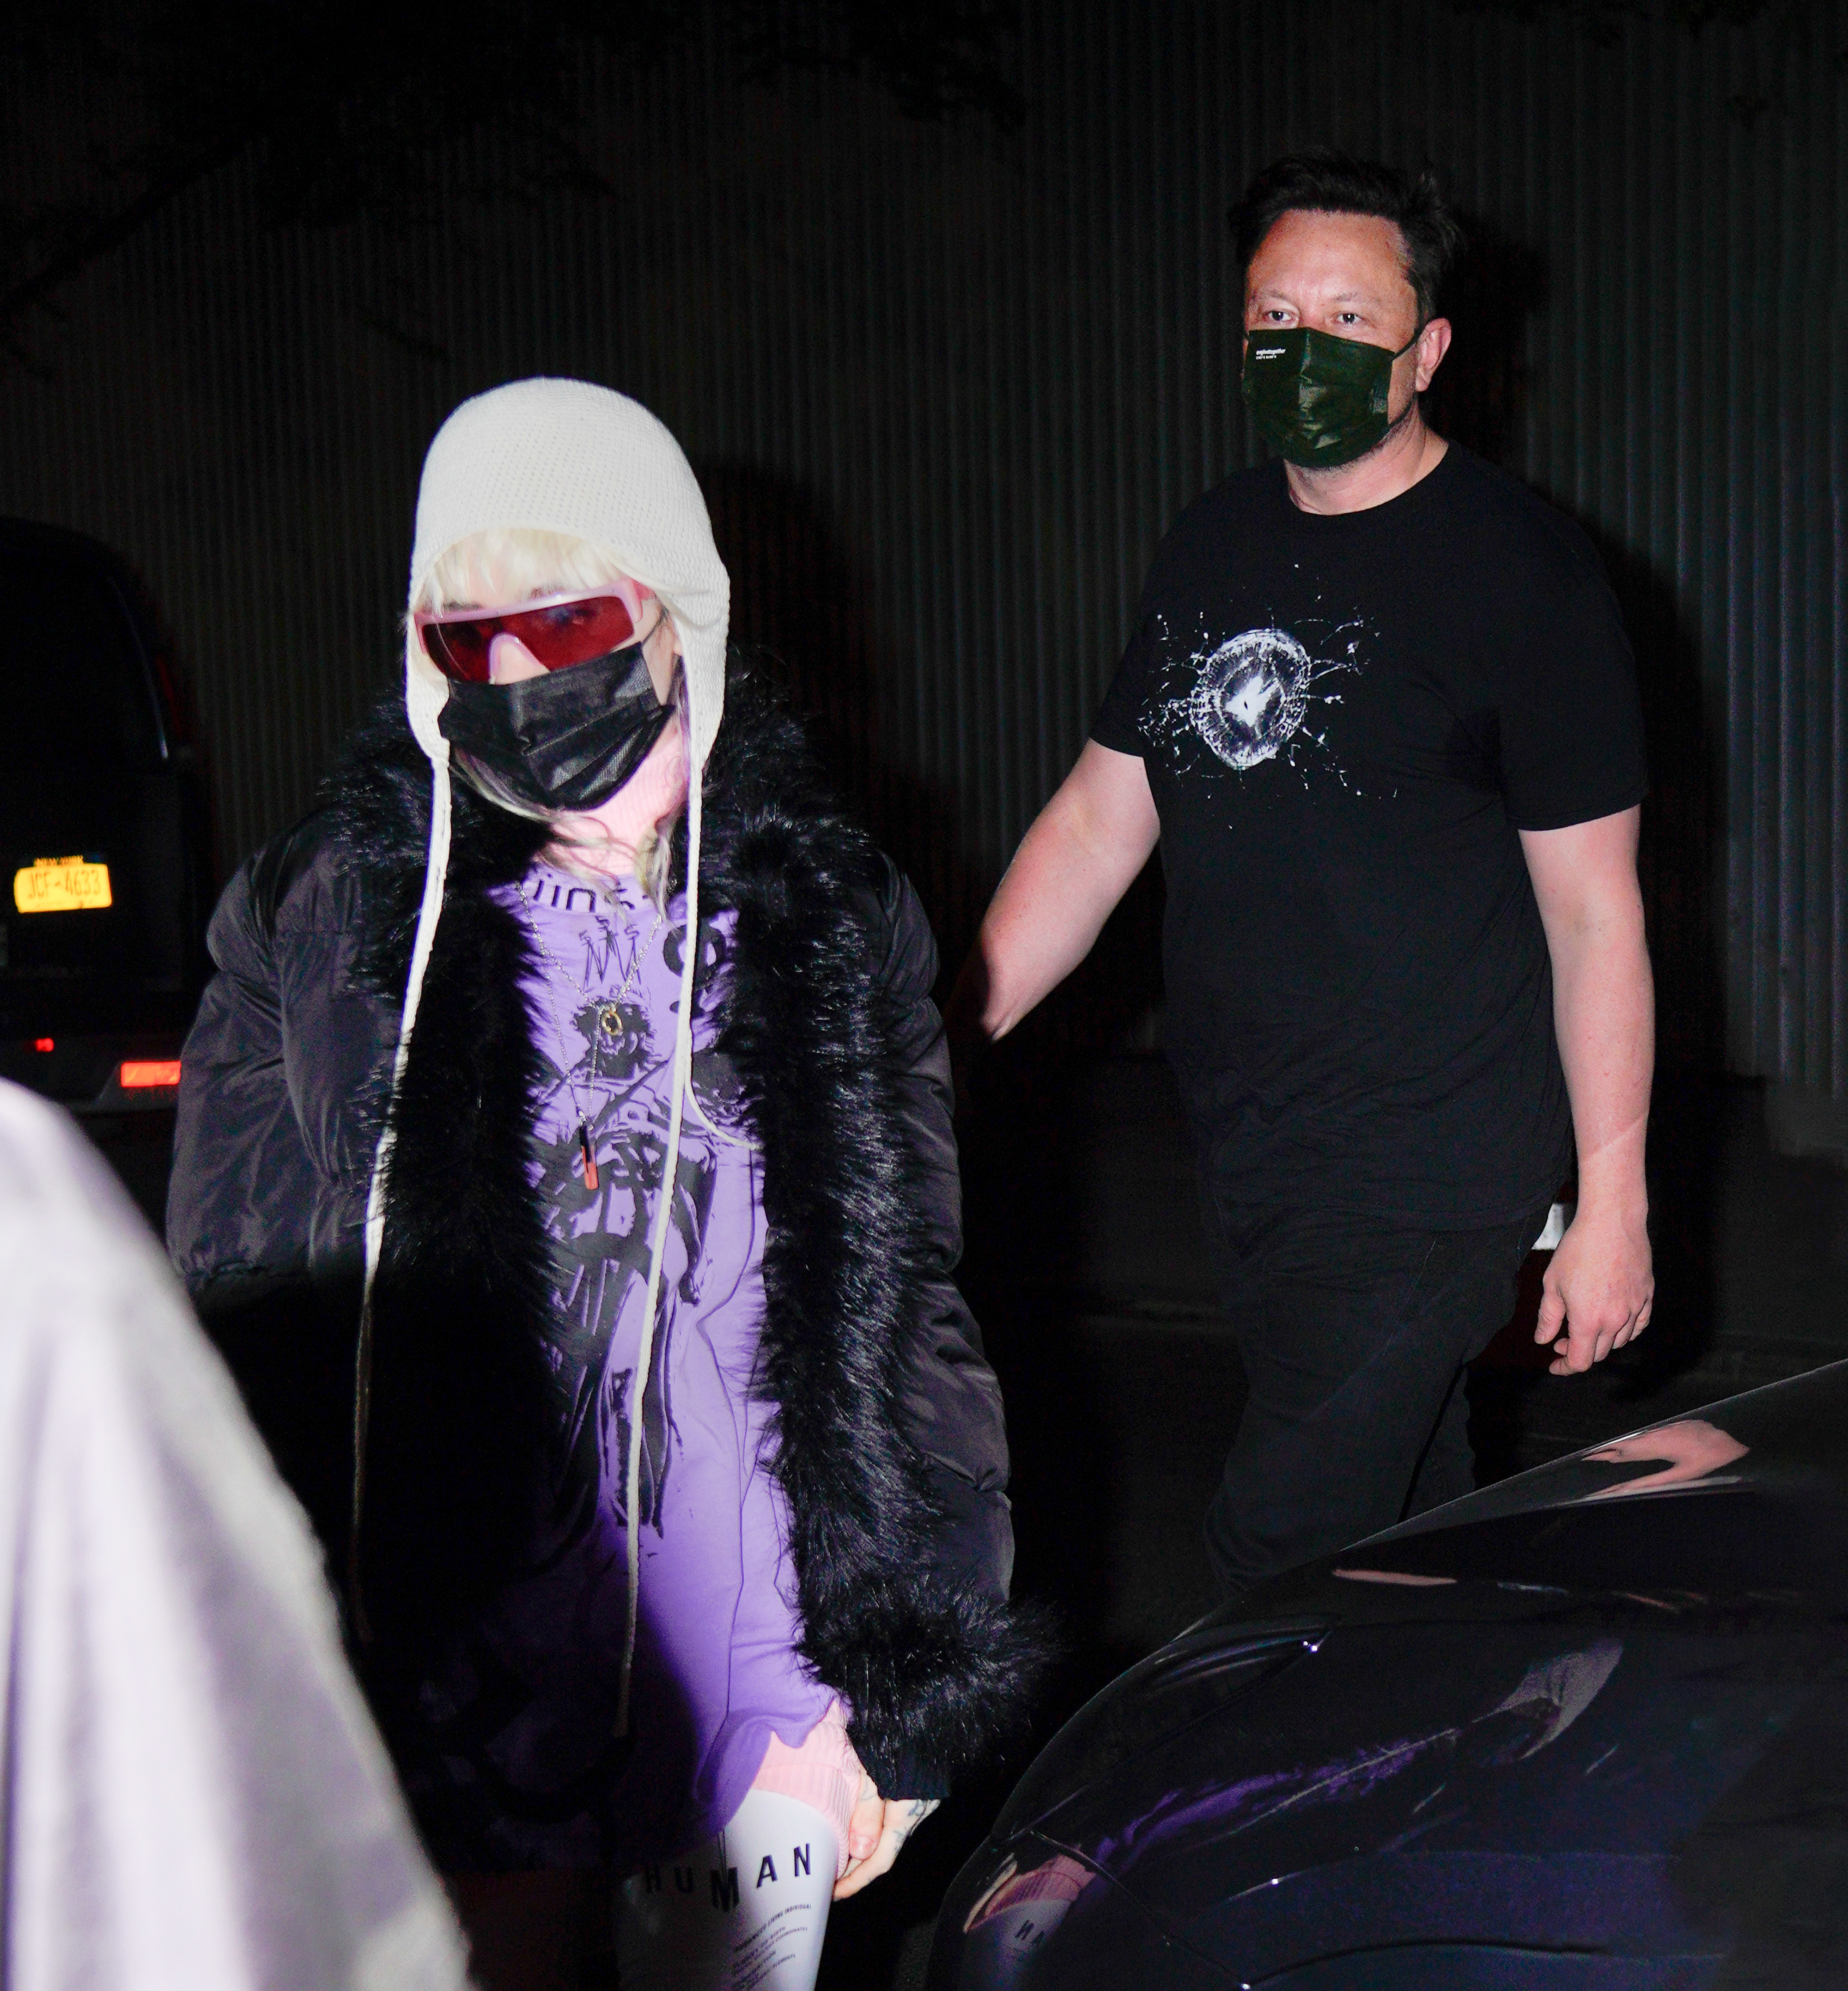 The two exiting a vehicle, Grimes in a beanie and sunglasses and Elon in a casual T-shirt, both wearing surgical masks